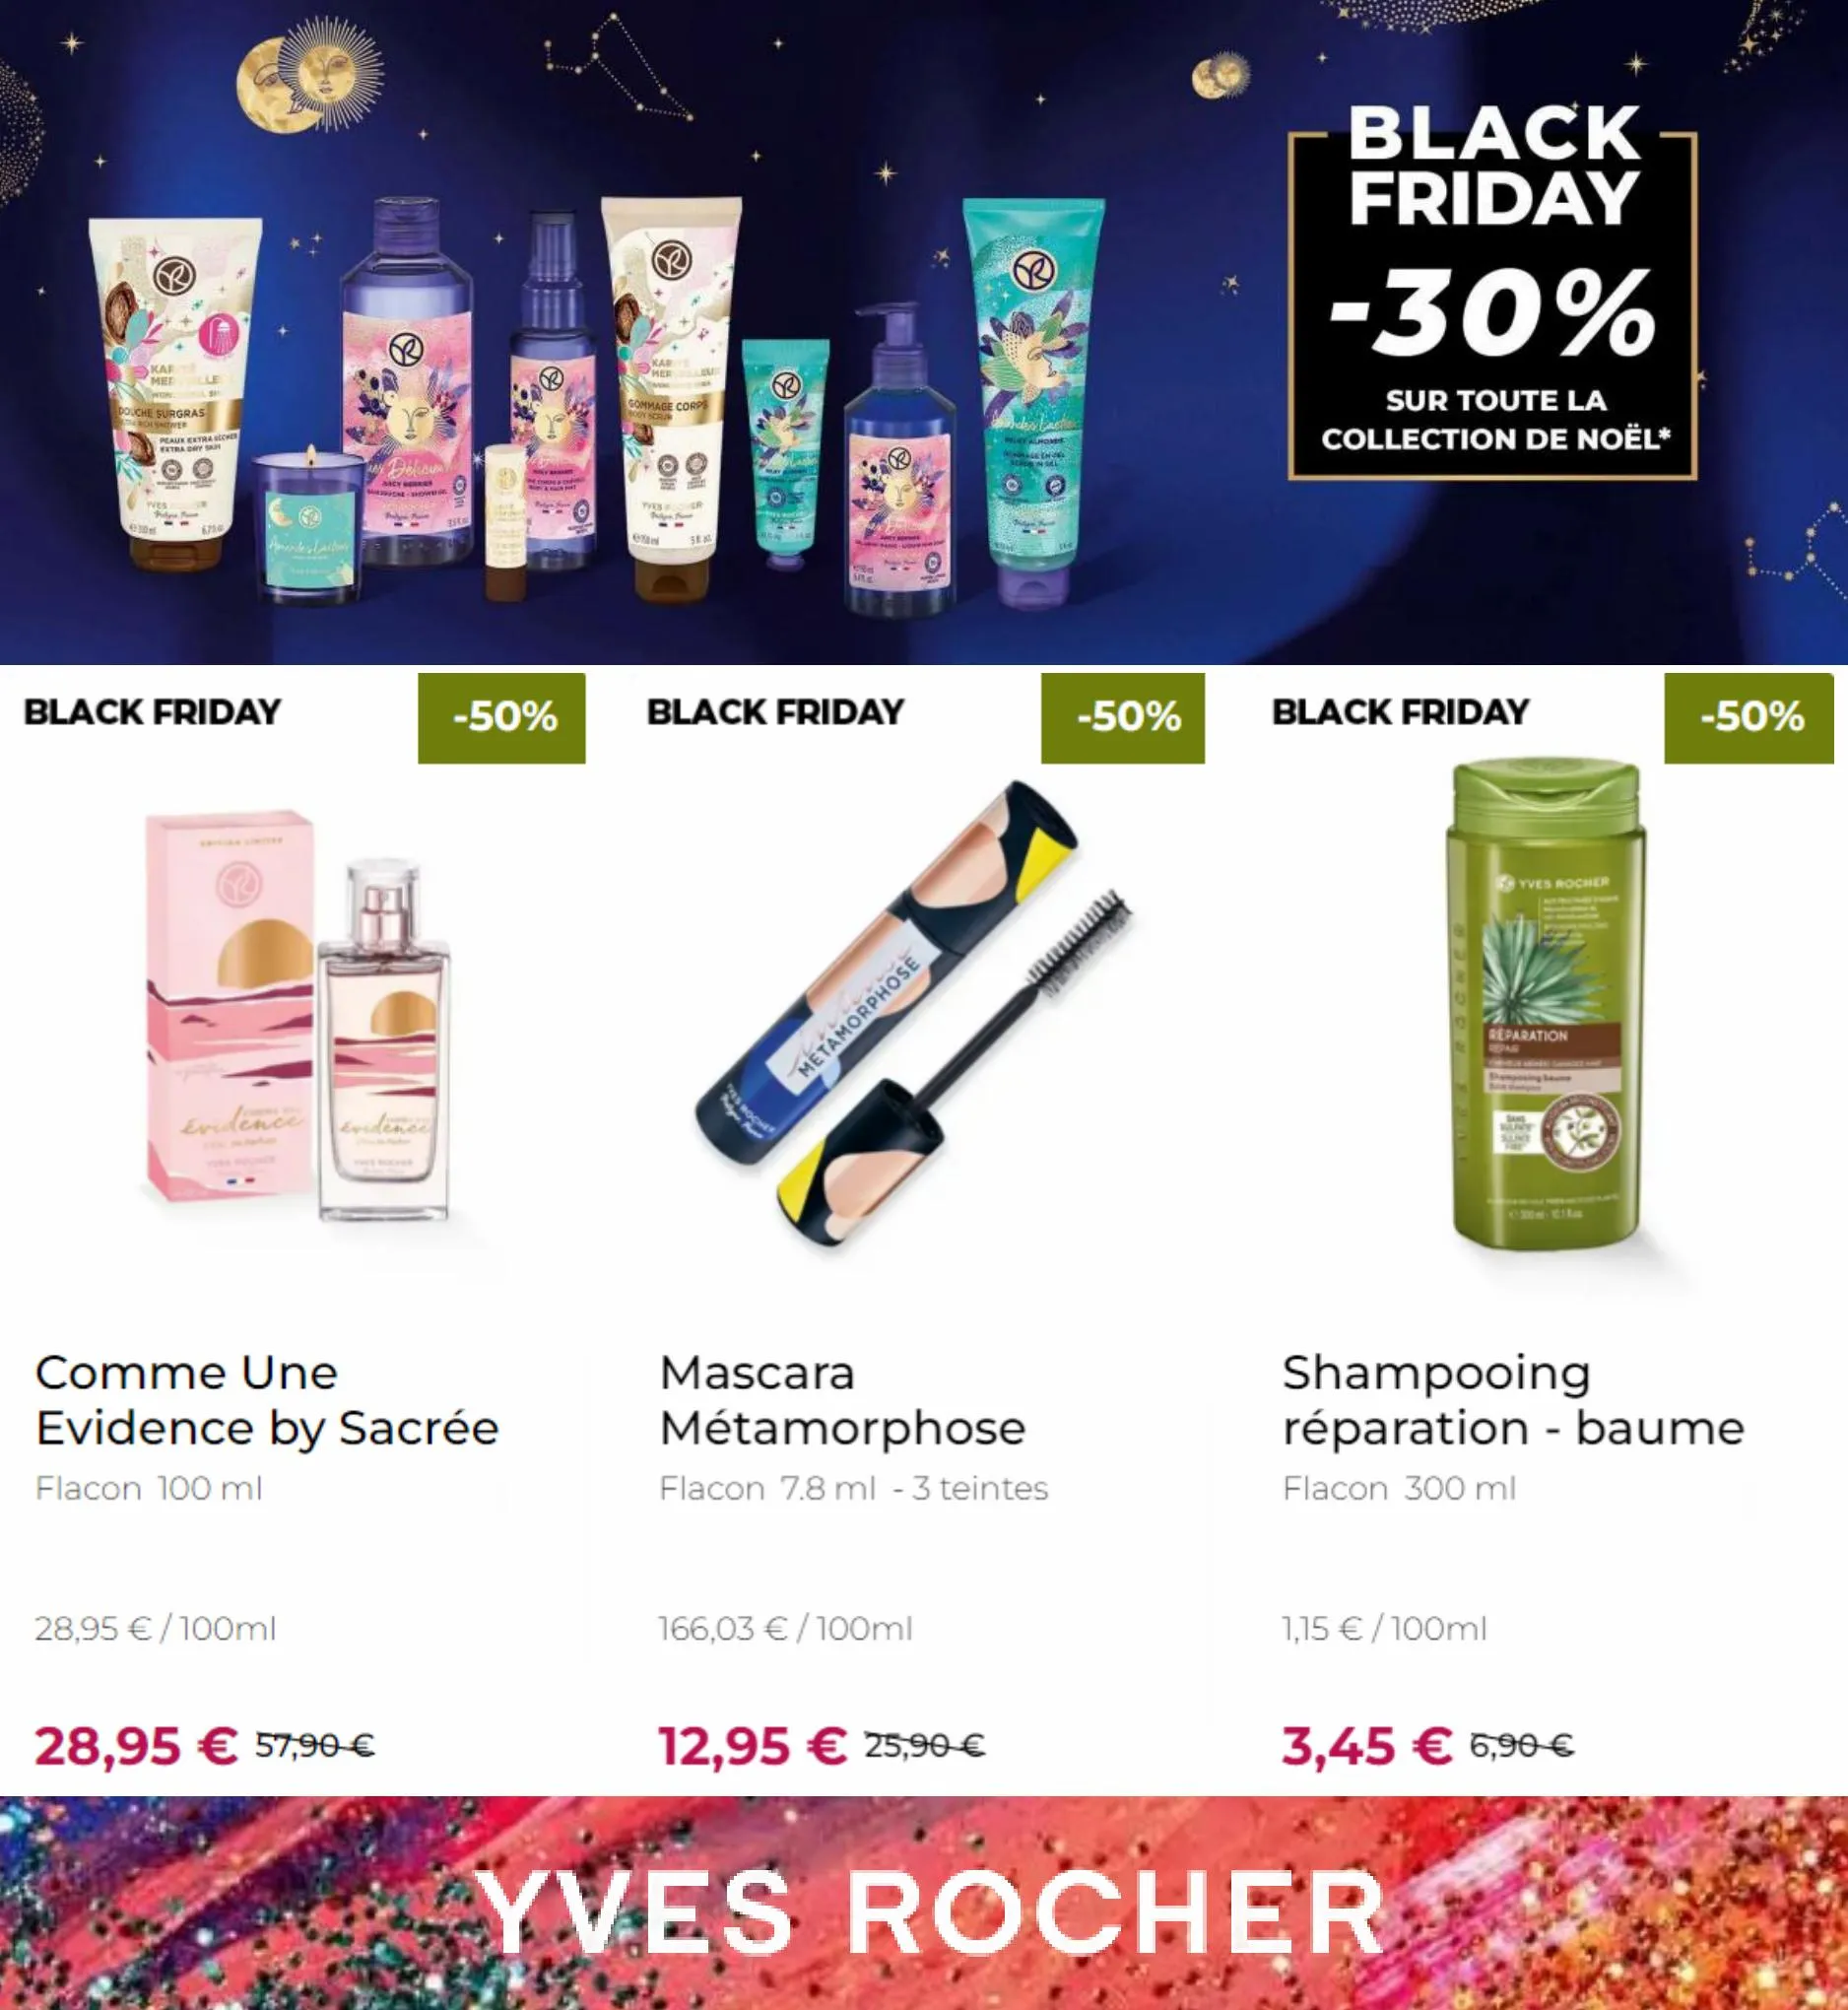 Catalogue Yves Rocher Black Friday, page 00002